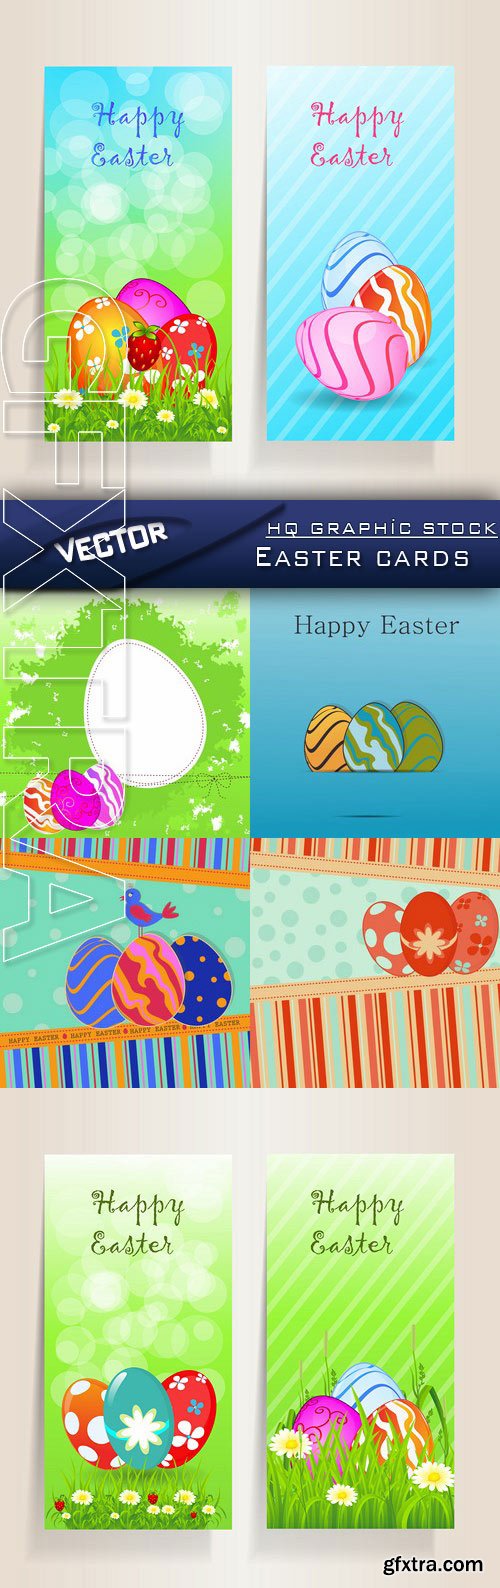 Stock Vector - Easter cards